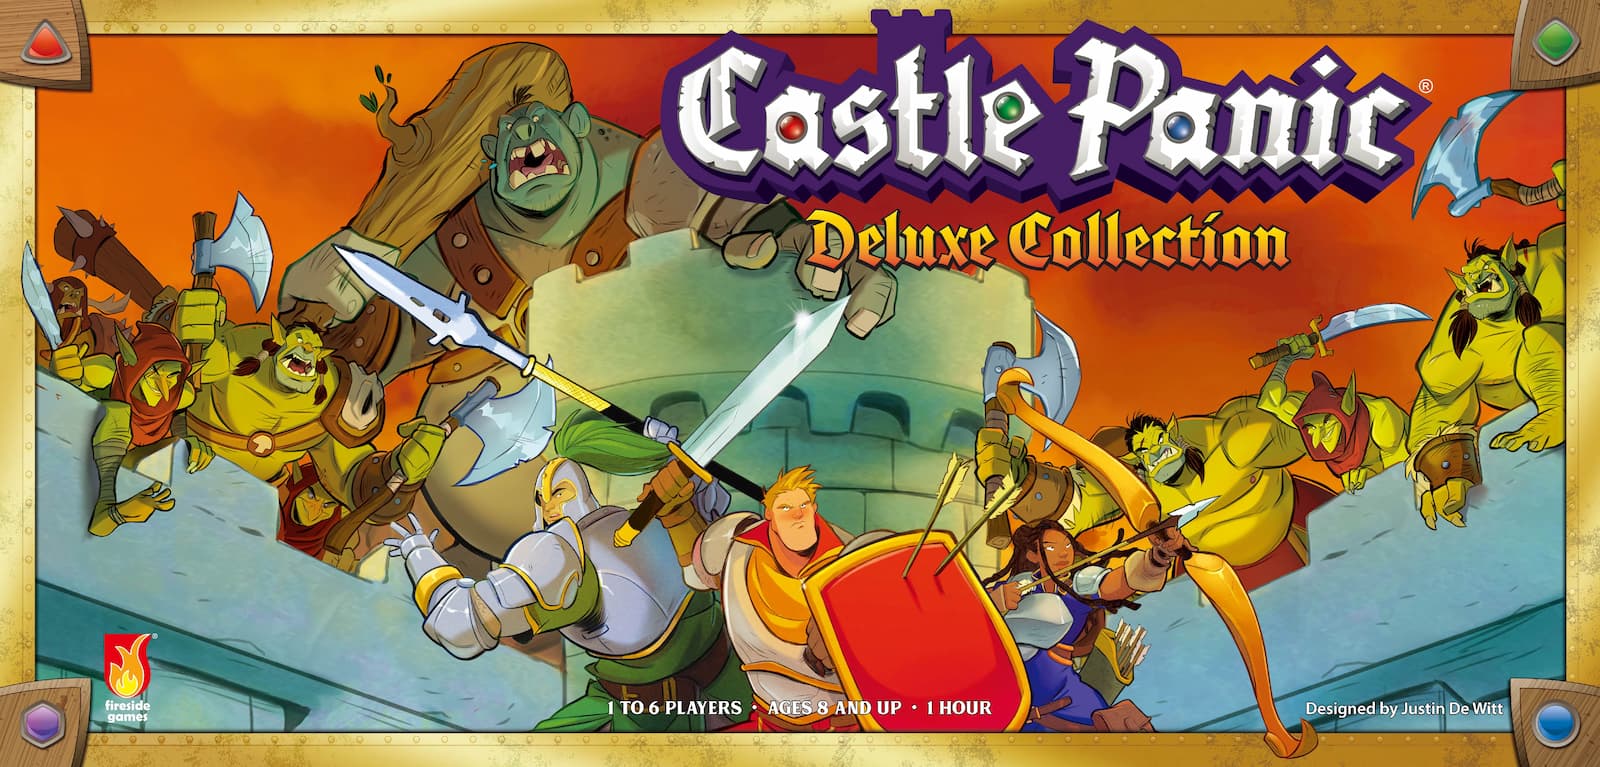 Castle Panic Deluxe Collection the board game was manufactured by Boda Games Manufacturing.